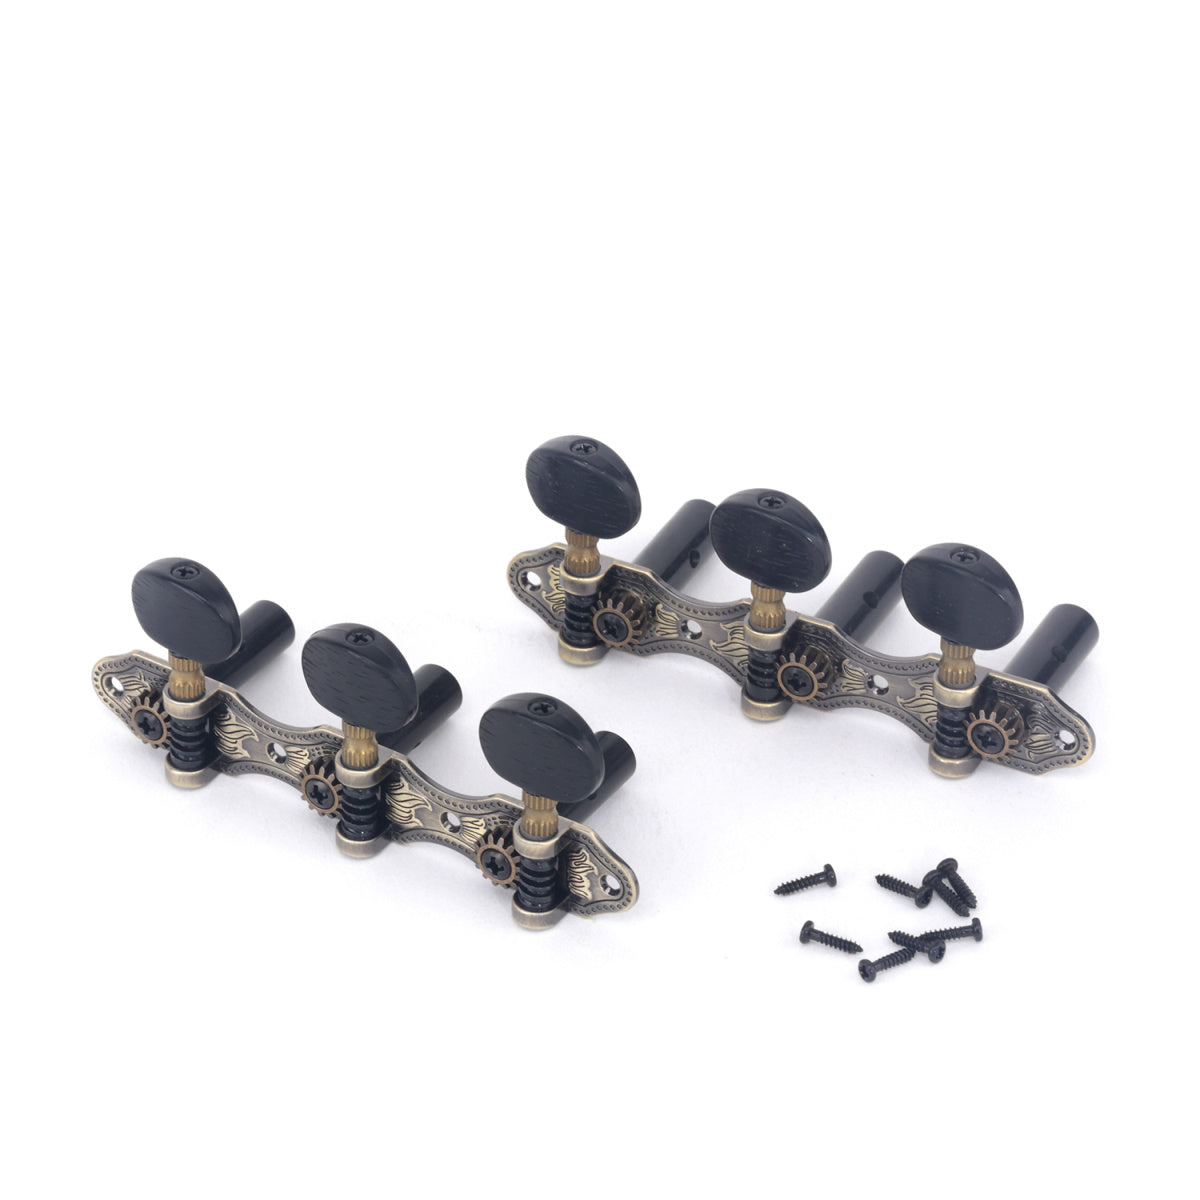 Musiclily Pro 3X3 Baker Style Classical Guitar Tuners Tuning Keys Machine Heads Set, Antique Brass